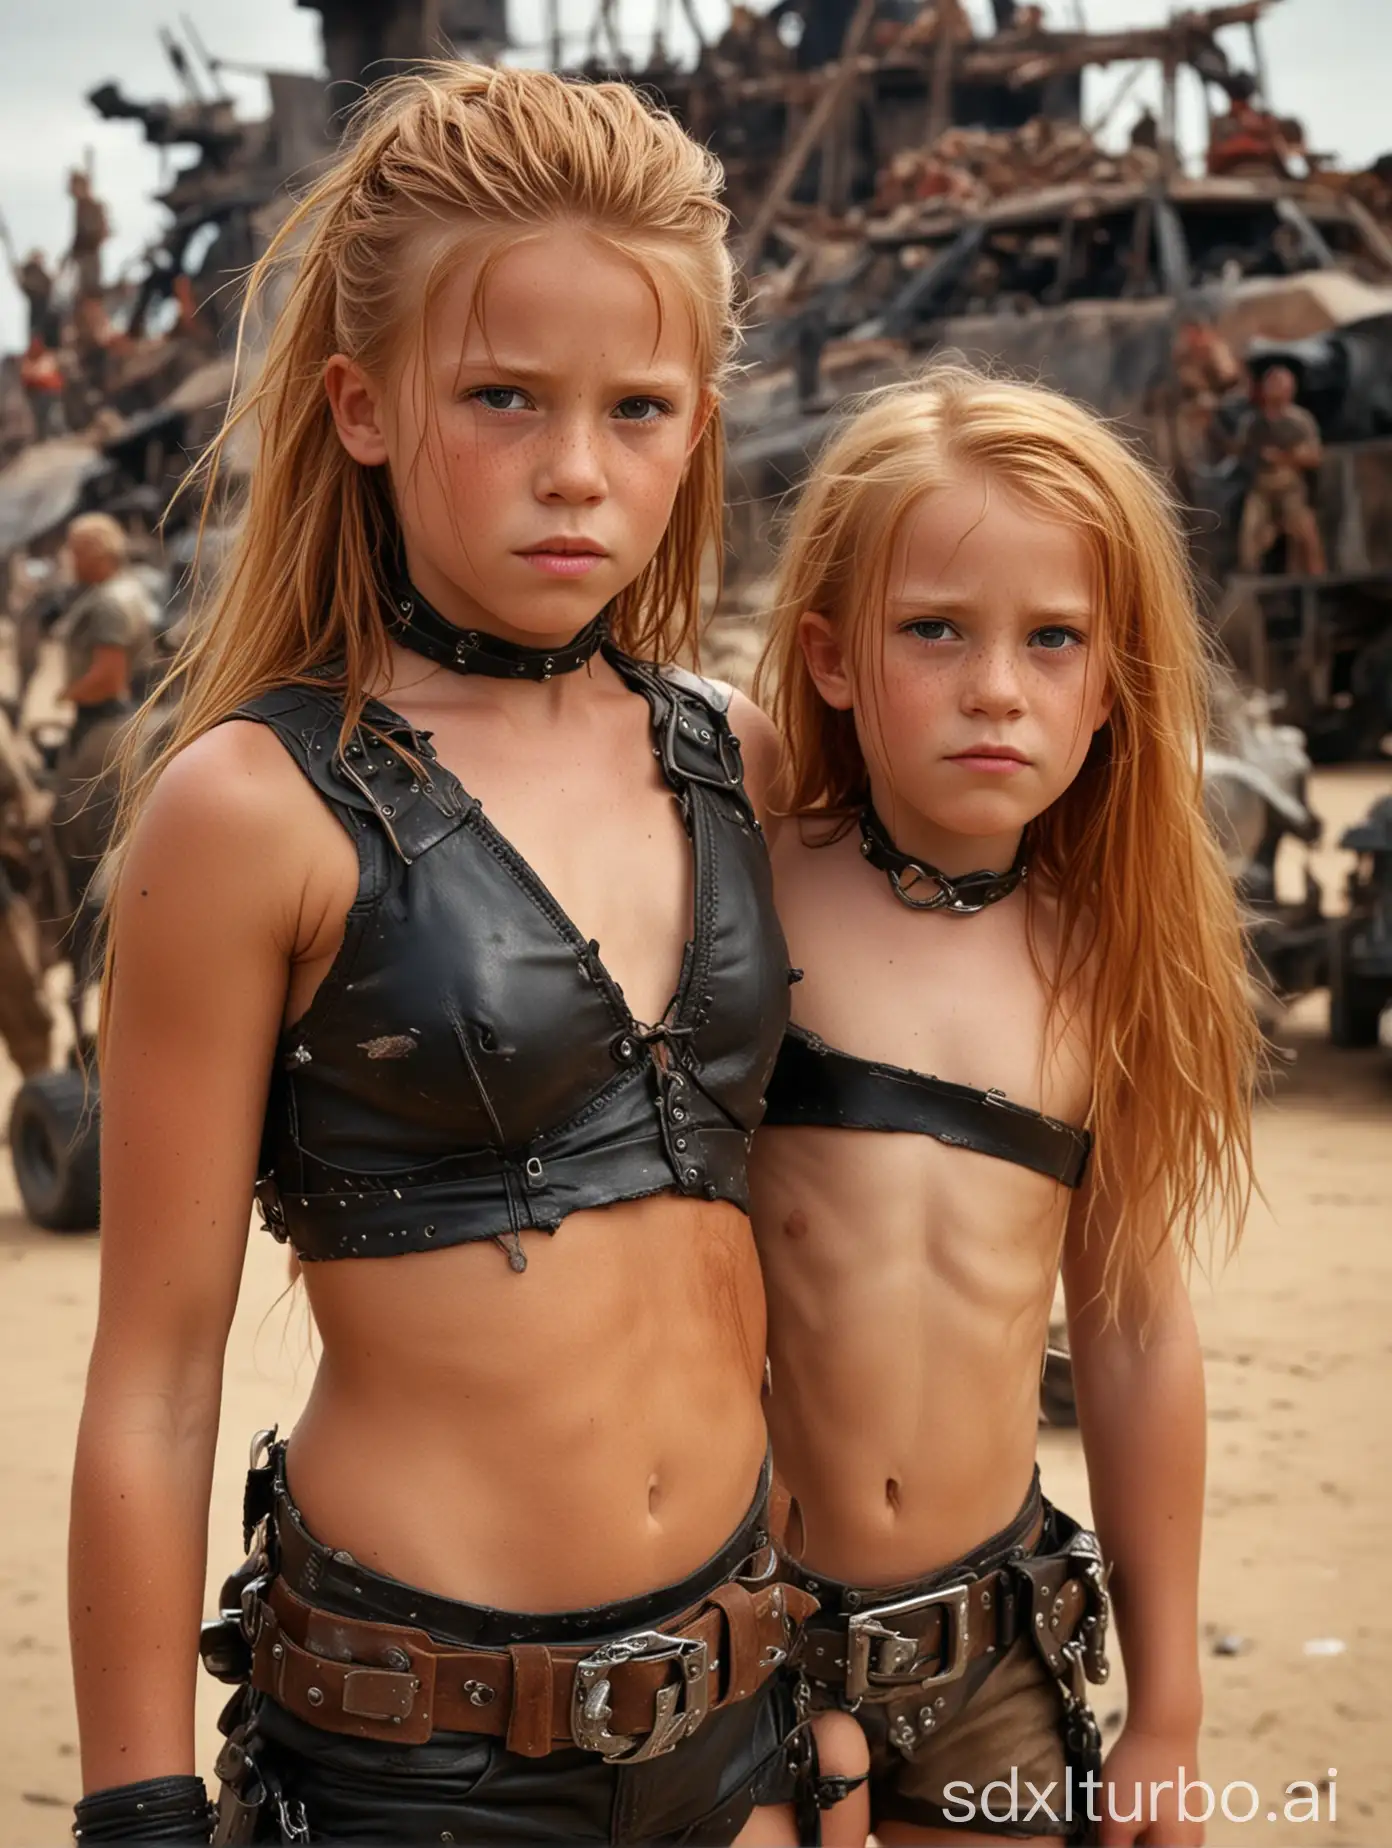 8 year old girl, leather bikini, choker, long ginger hair, extremely muscular abs, in Mad Max Beyond Thunderdome, tanned skin, 